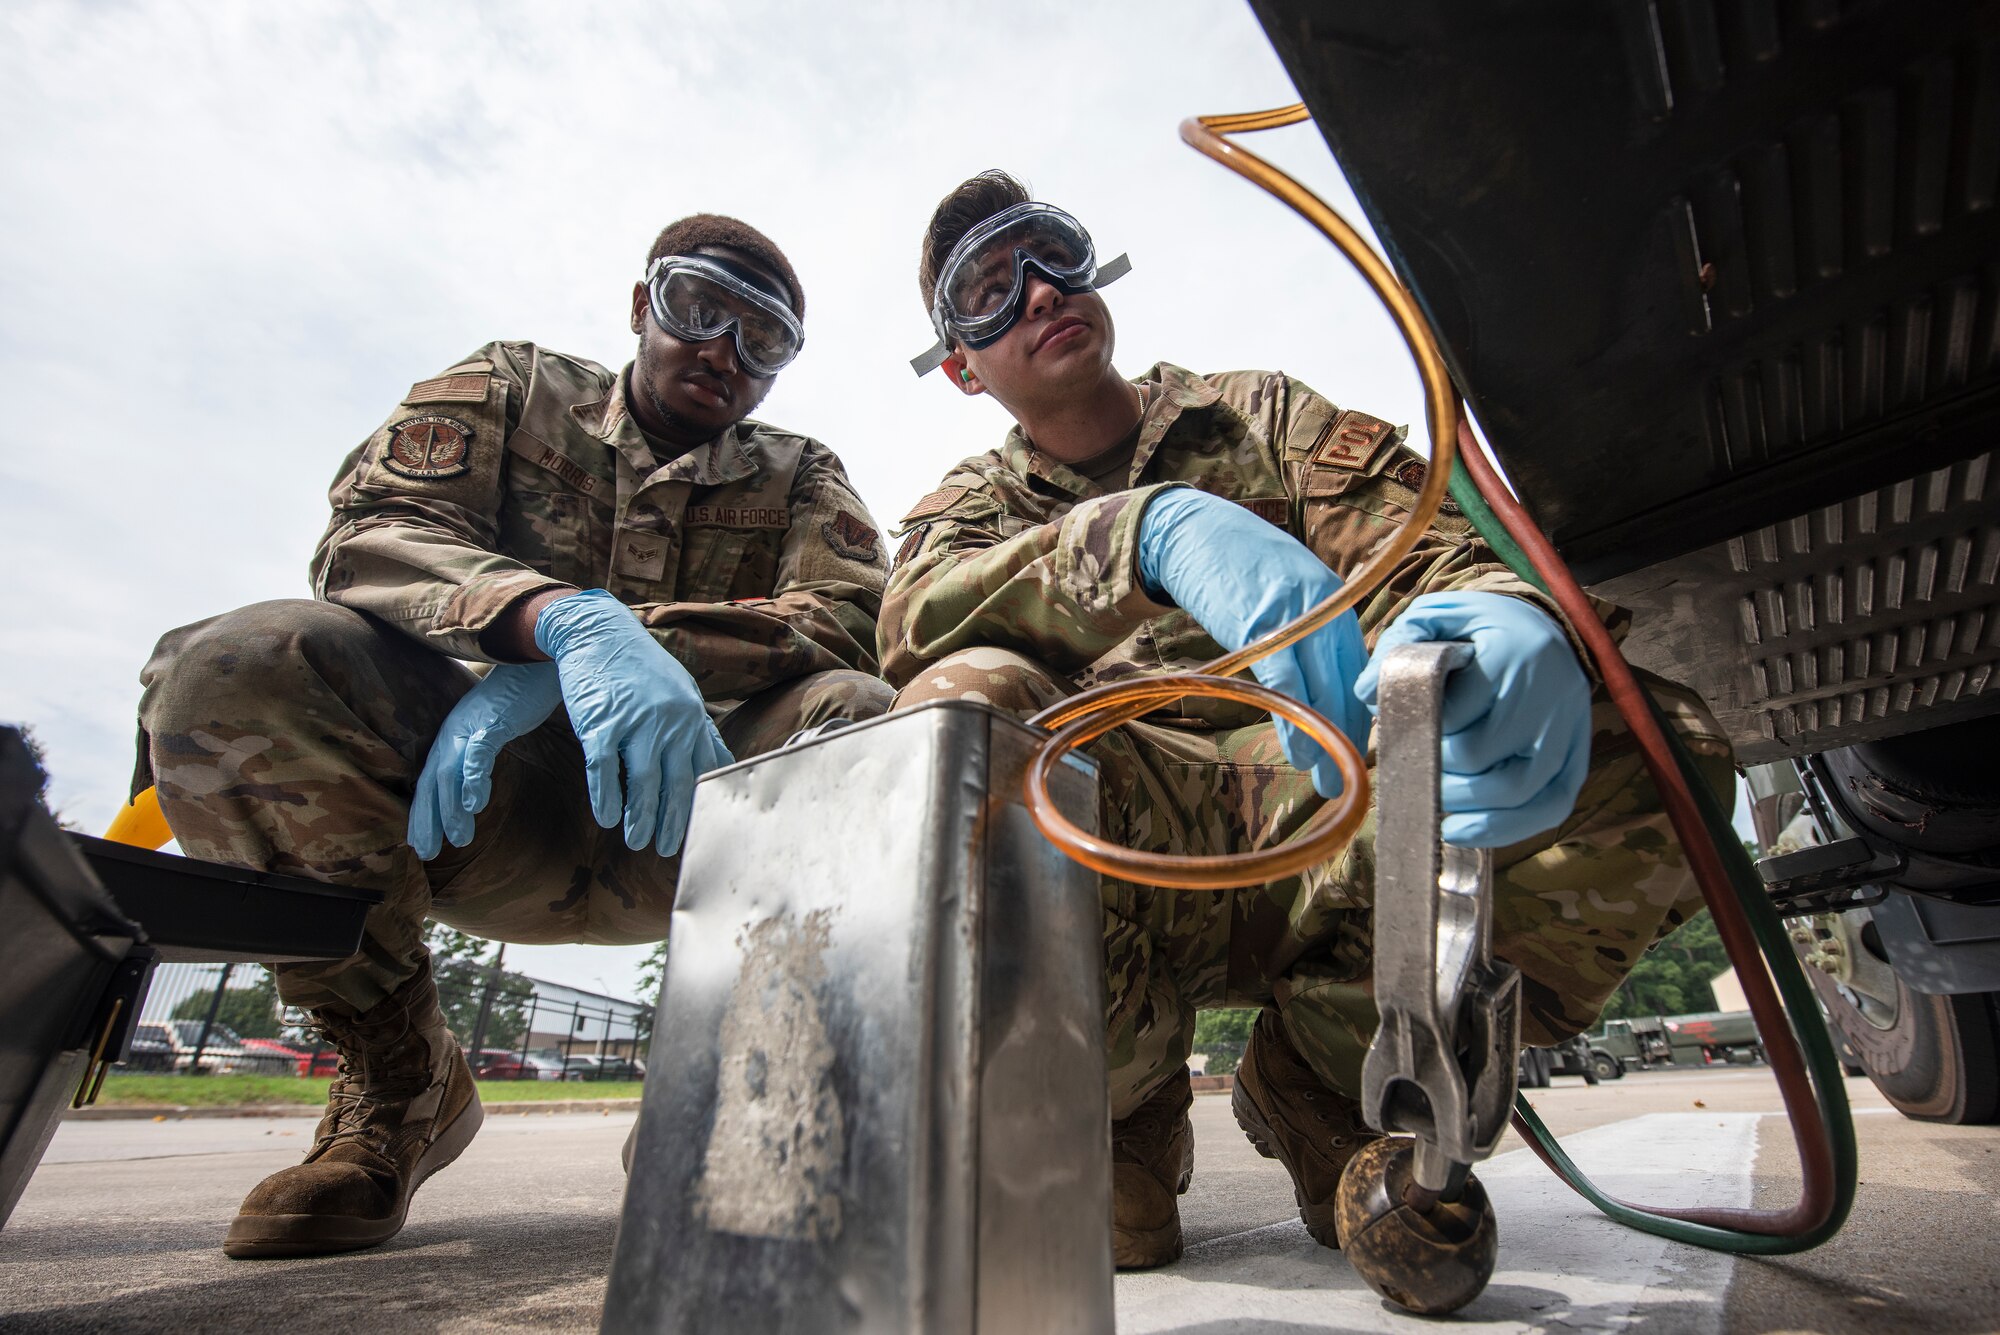 Staff Sgt. Dylan Gardner, right, 4th Logistics Readiness Squadron fuels laboratory NCOIC, and Airman 1st Class Adrian Morris, 4th LRS fuels laboratory fuels distribution operator, transfer fuel from fuel truck to a container in preparation for testing at Seymour Johnson Air Force Base, North Carolina, Aug. 10, 2023. Airmen assigned to the 4th LRS fuels lab are responsible for testing the cleanliness and quality of fuel used in ground and air operations to help ensure the safety of Airmen and assets when performing the day-to-day mission. (U.S. Air Force photo by Tech. Sgt. Christopher Hubenthal)